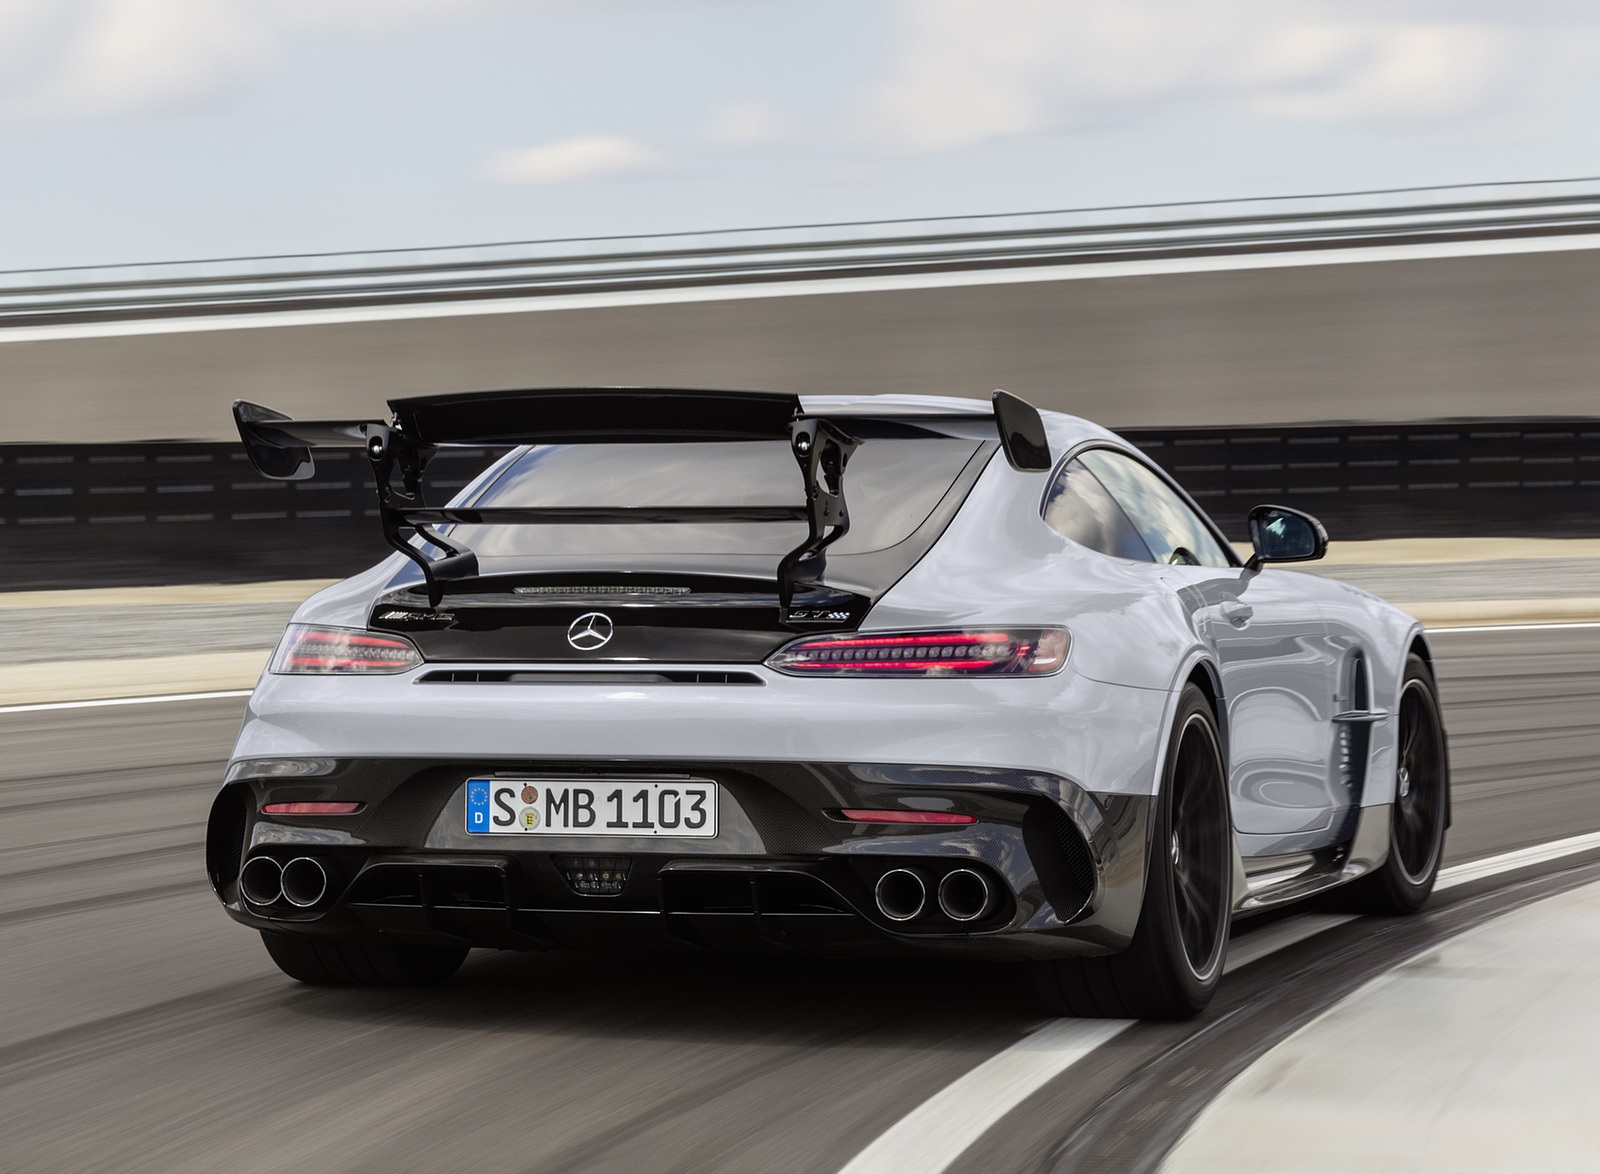 2021 Mercedes-AMG GT Black Series (Color: High Tech Silver) Rear Wallpapers  #143 of 204